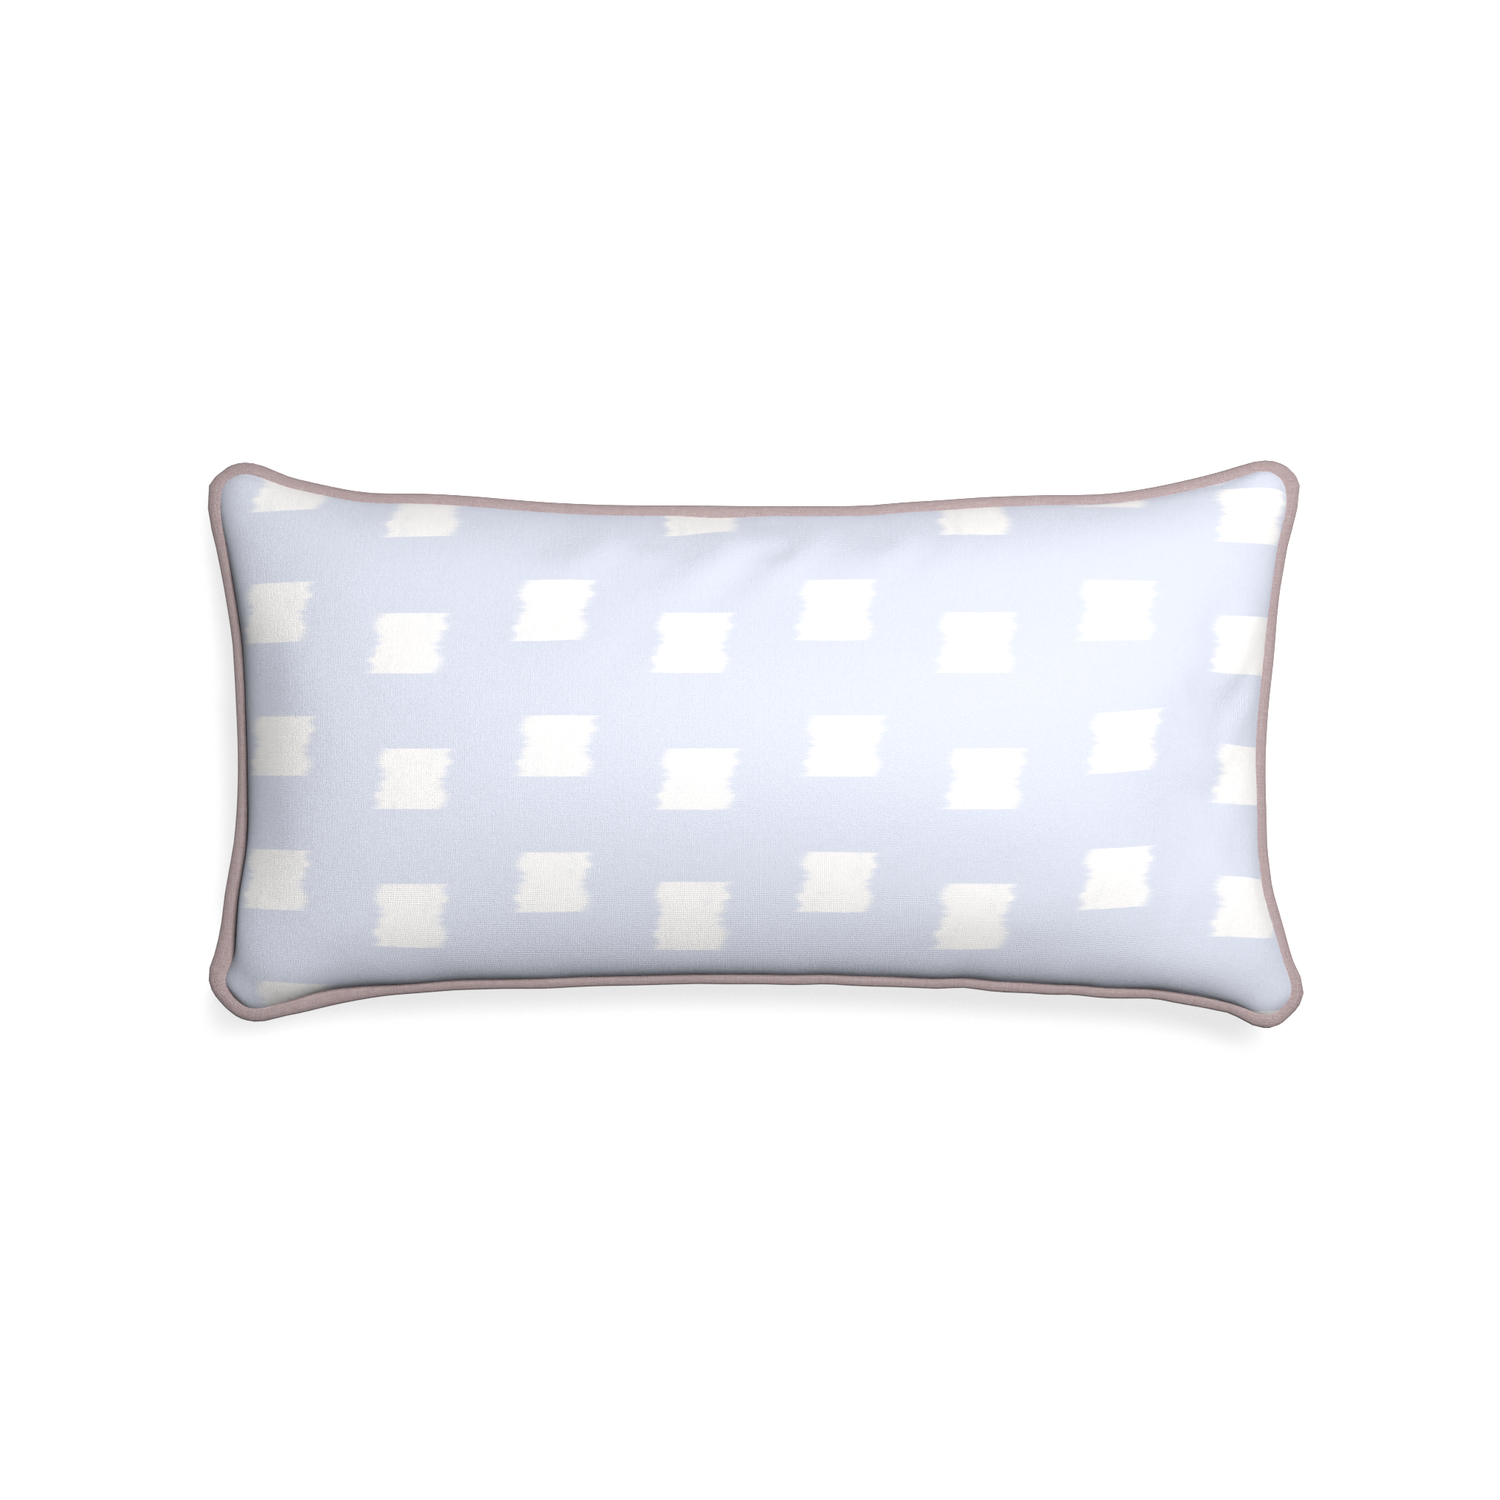 Midi-lumbar denton custom sky blue patternpillow with orchid piping on white background